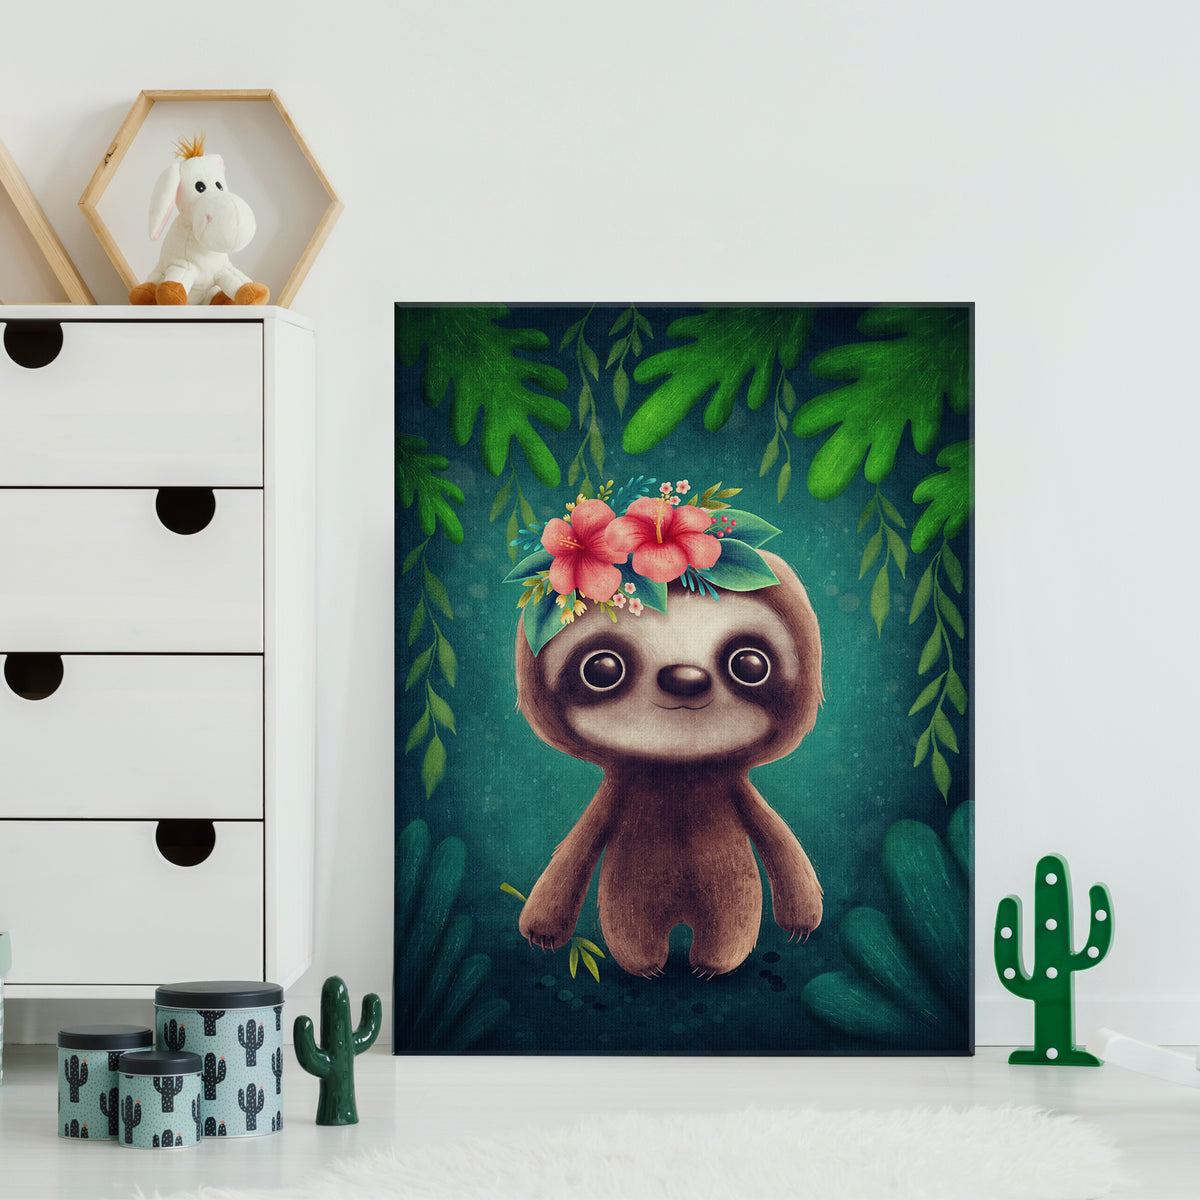 Cute Little Sloth Canvas Print ArtLexy 1 Panel 16"x24" inches 